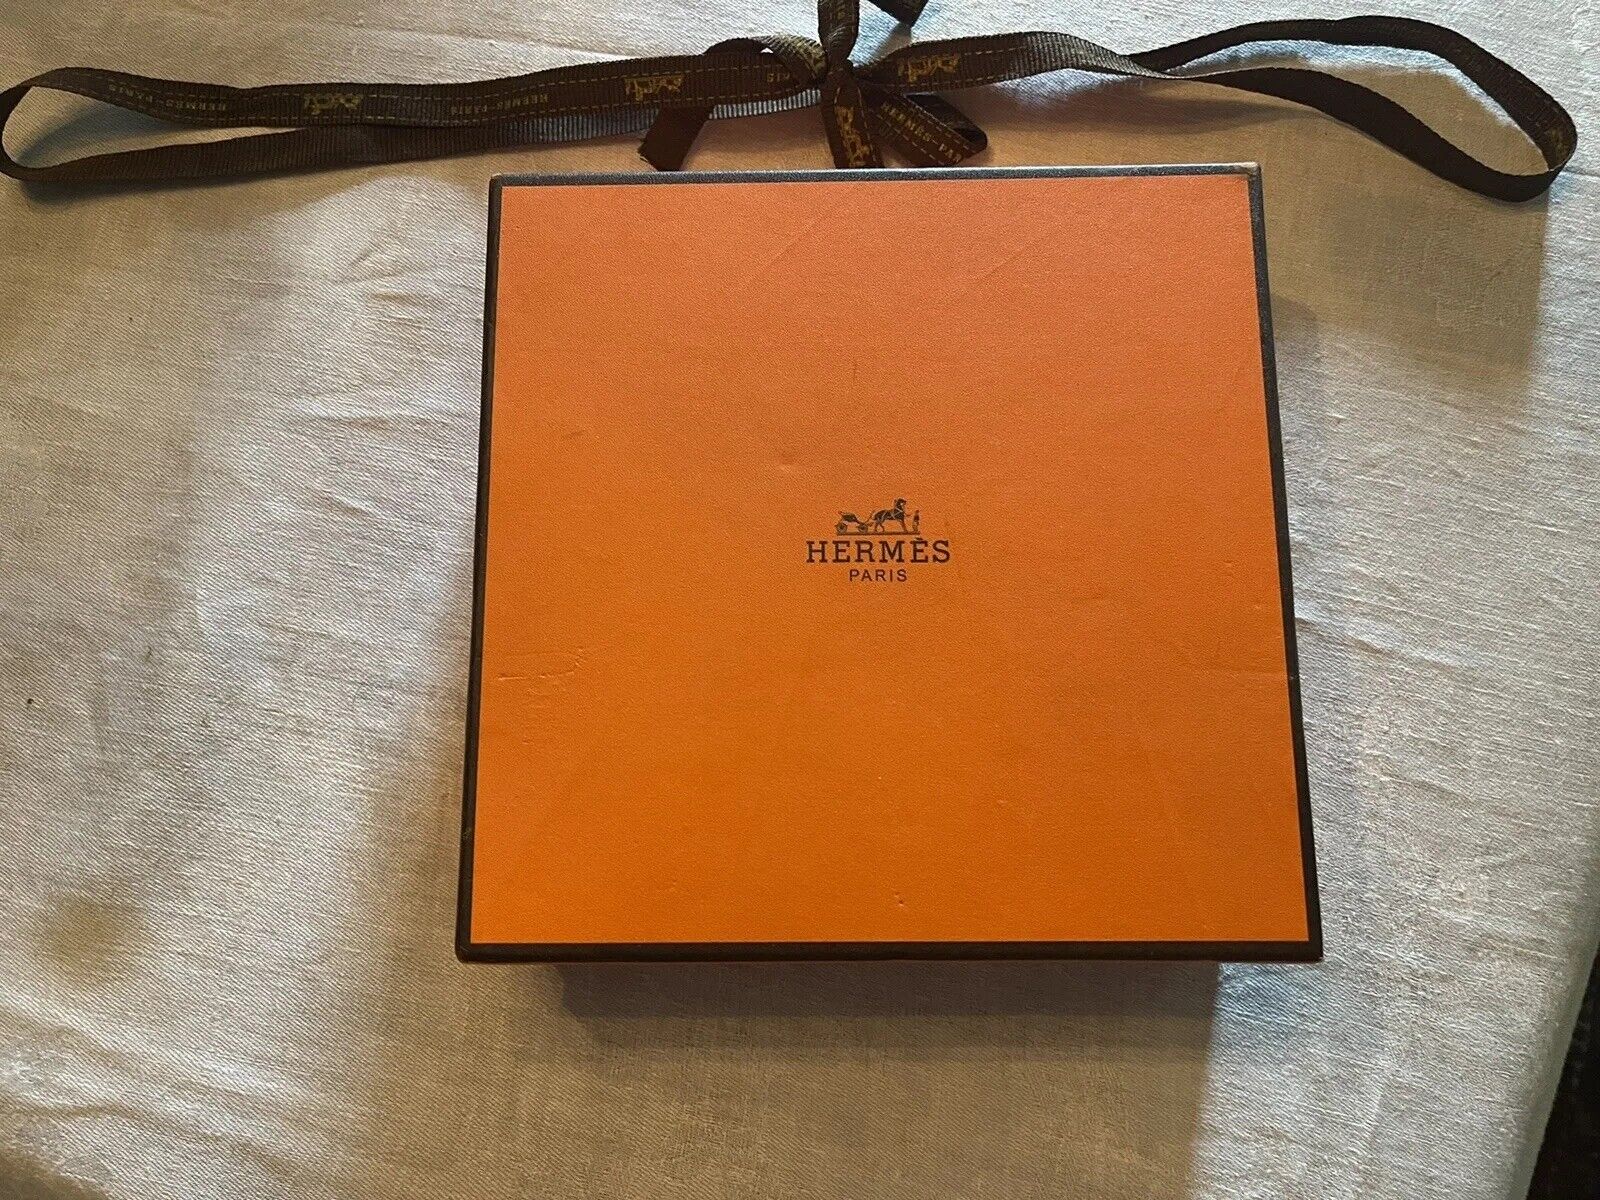 100% AUTHENTIC HERMES PARIS SHOPPING Tote & Box Plus Assorted Tags Hermes Ribbon